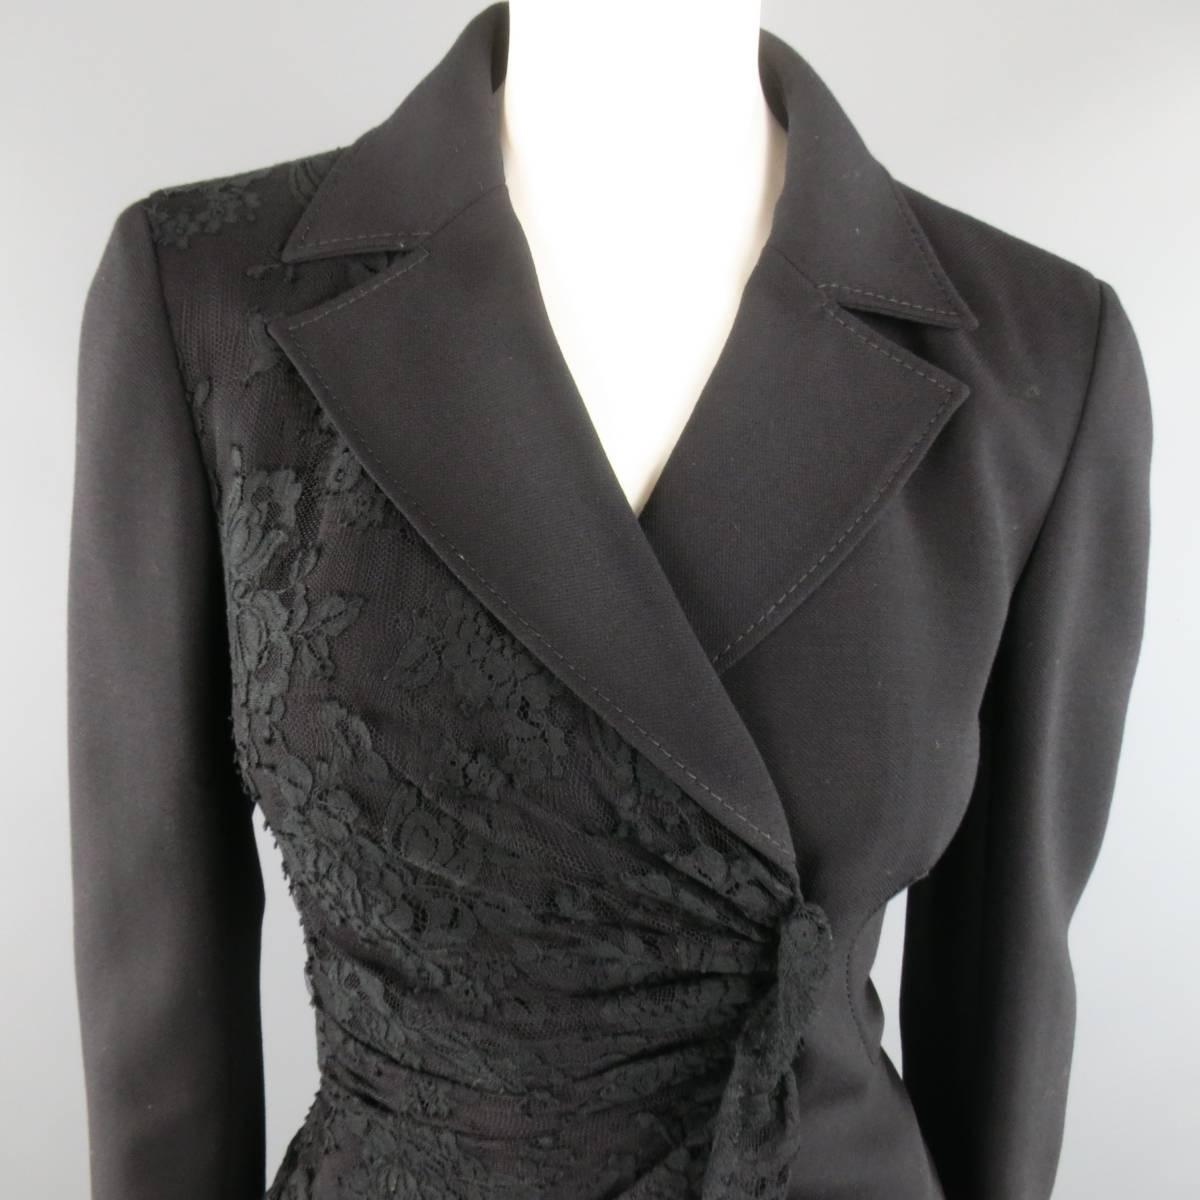 Gorgeous VALENTINO blazer jacket in black wool fabric featuring a classic pointed collar, fitted, cropped silhouette, half draped lace overlay with double breasted, wrap closure, and lace trim cuffs. Minor wear. Made in Italy.
 
Good Pre-Owned